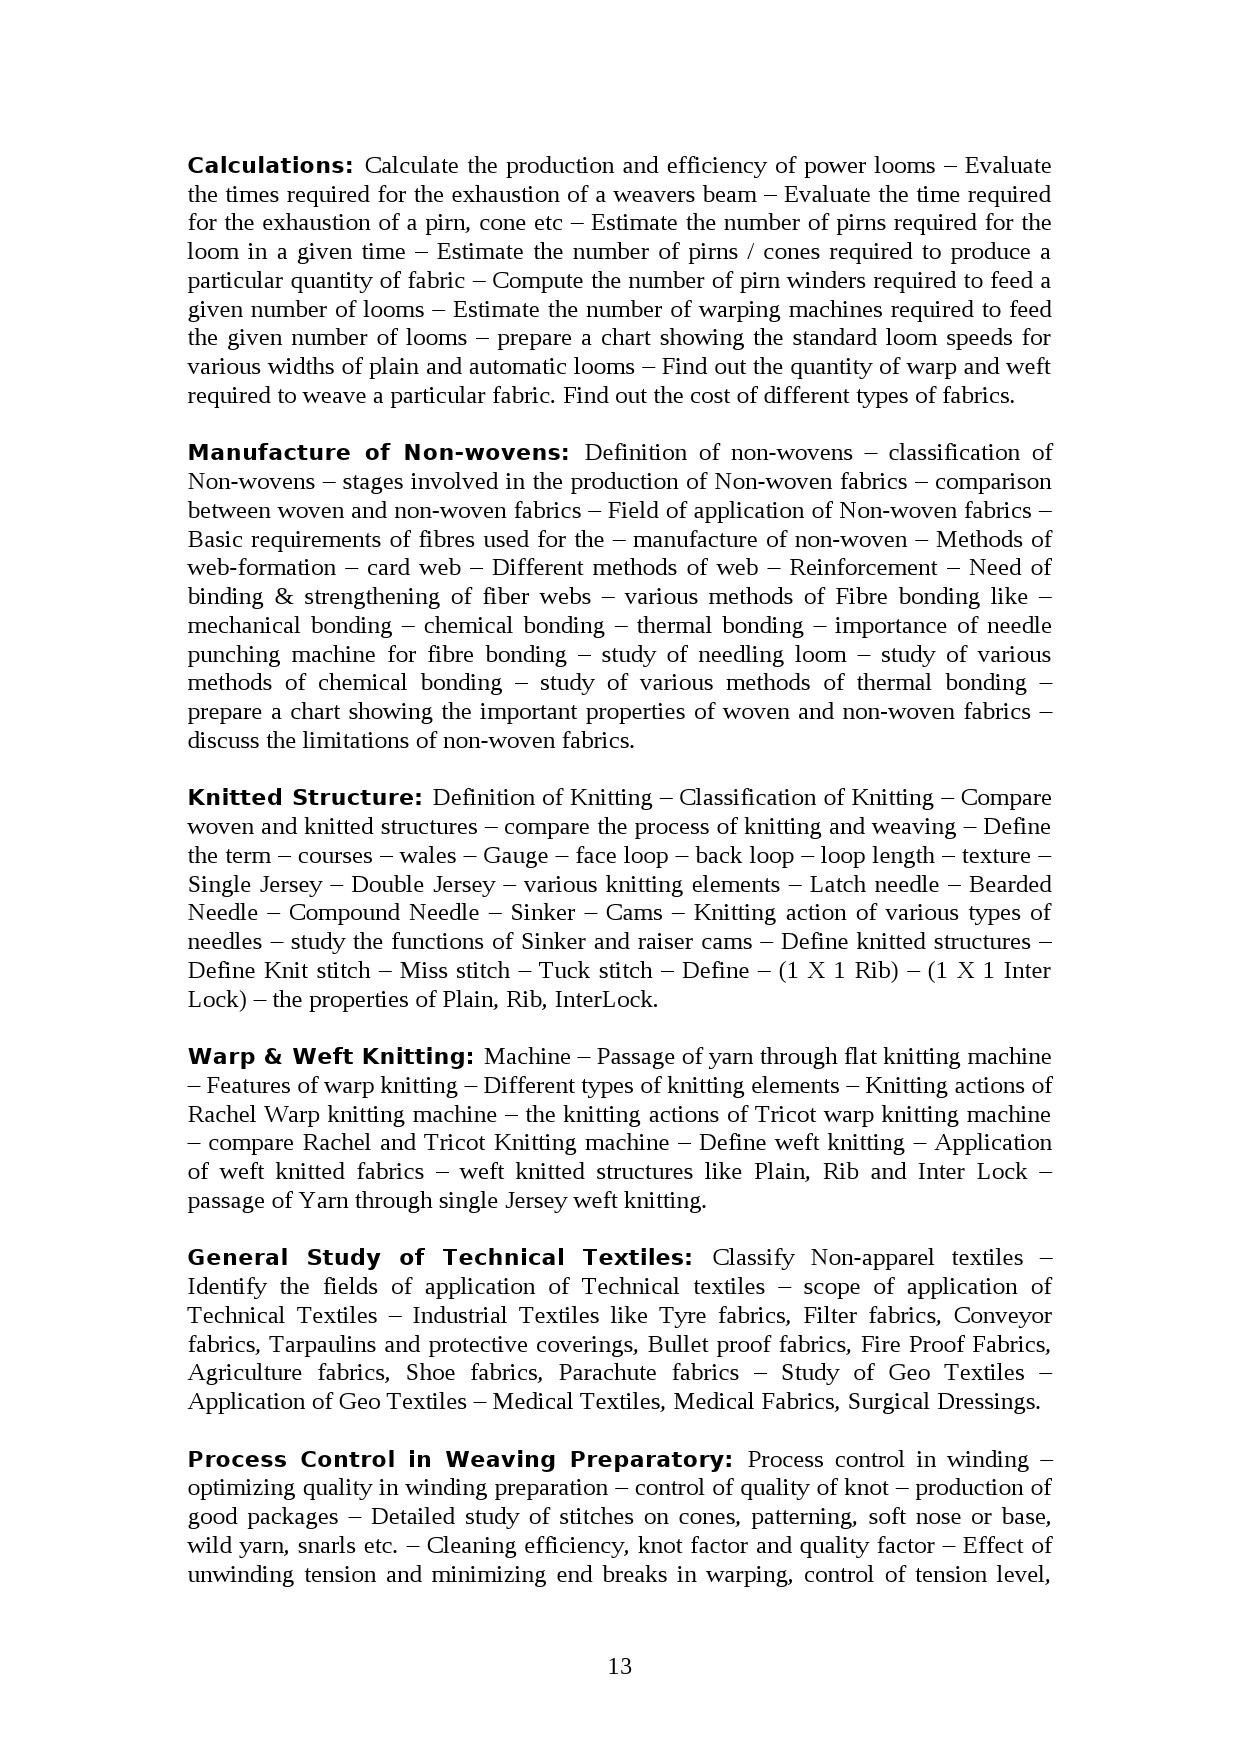 Textile Technology Lecturer in Polytechnic Exam Syllabus - Notification Image 13